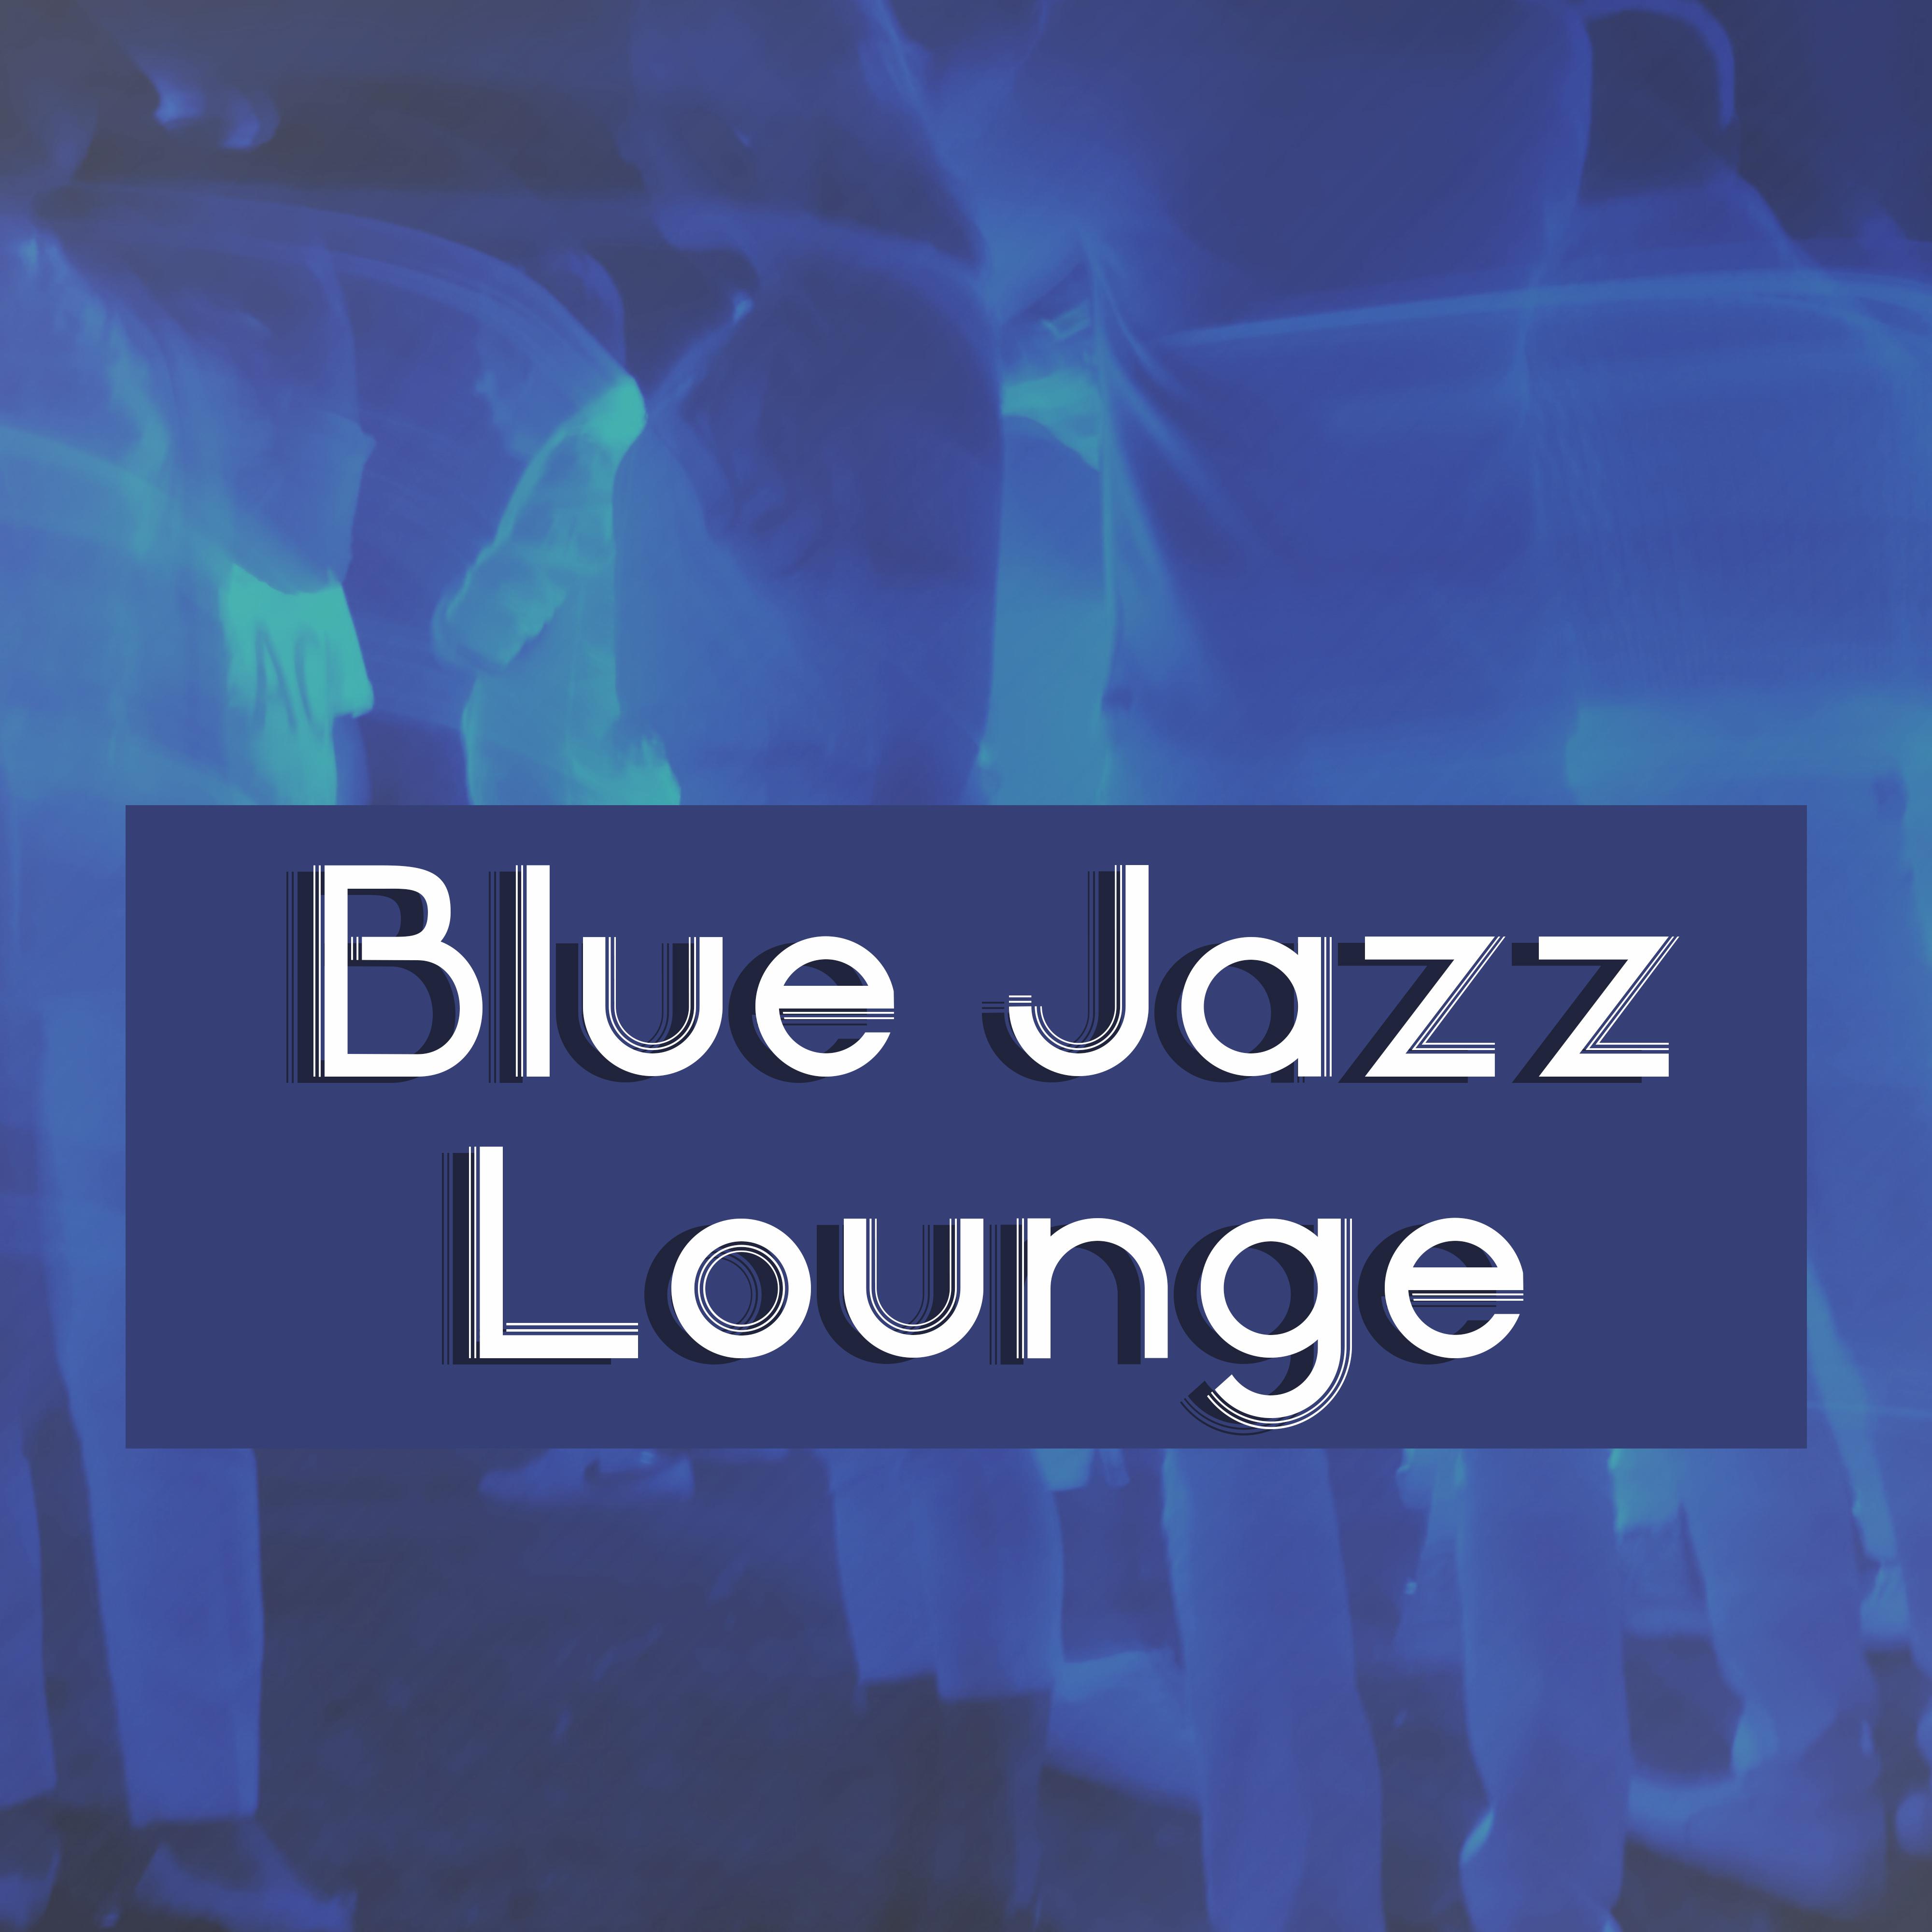 Blue Jazz Lounge  The Piano Bar, Jazz Lounge, Ambient Instrumental, Music for Club